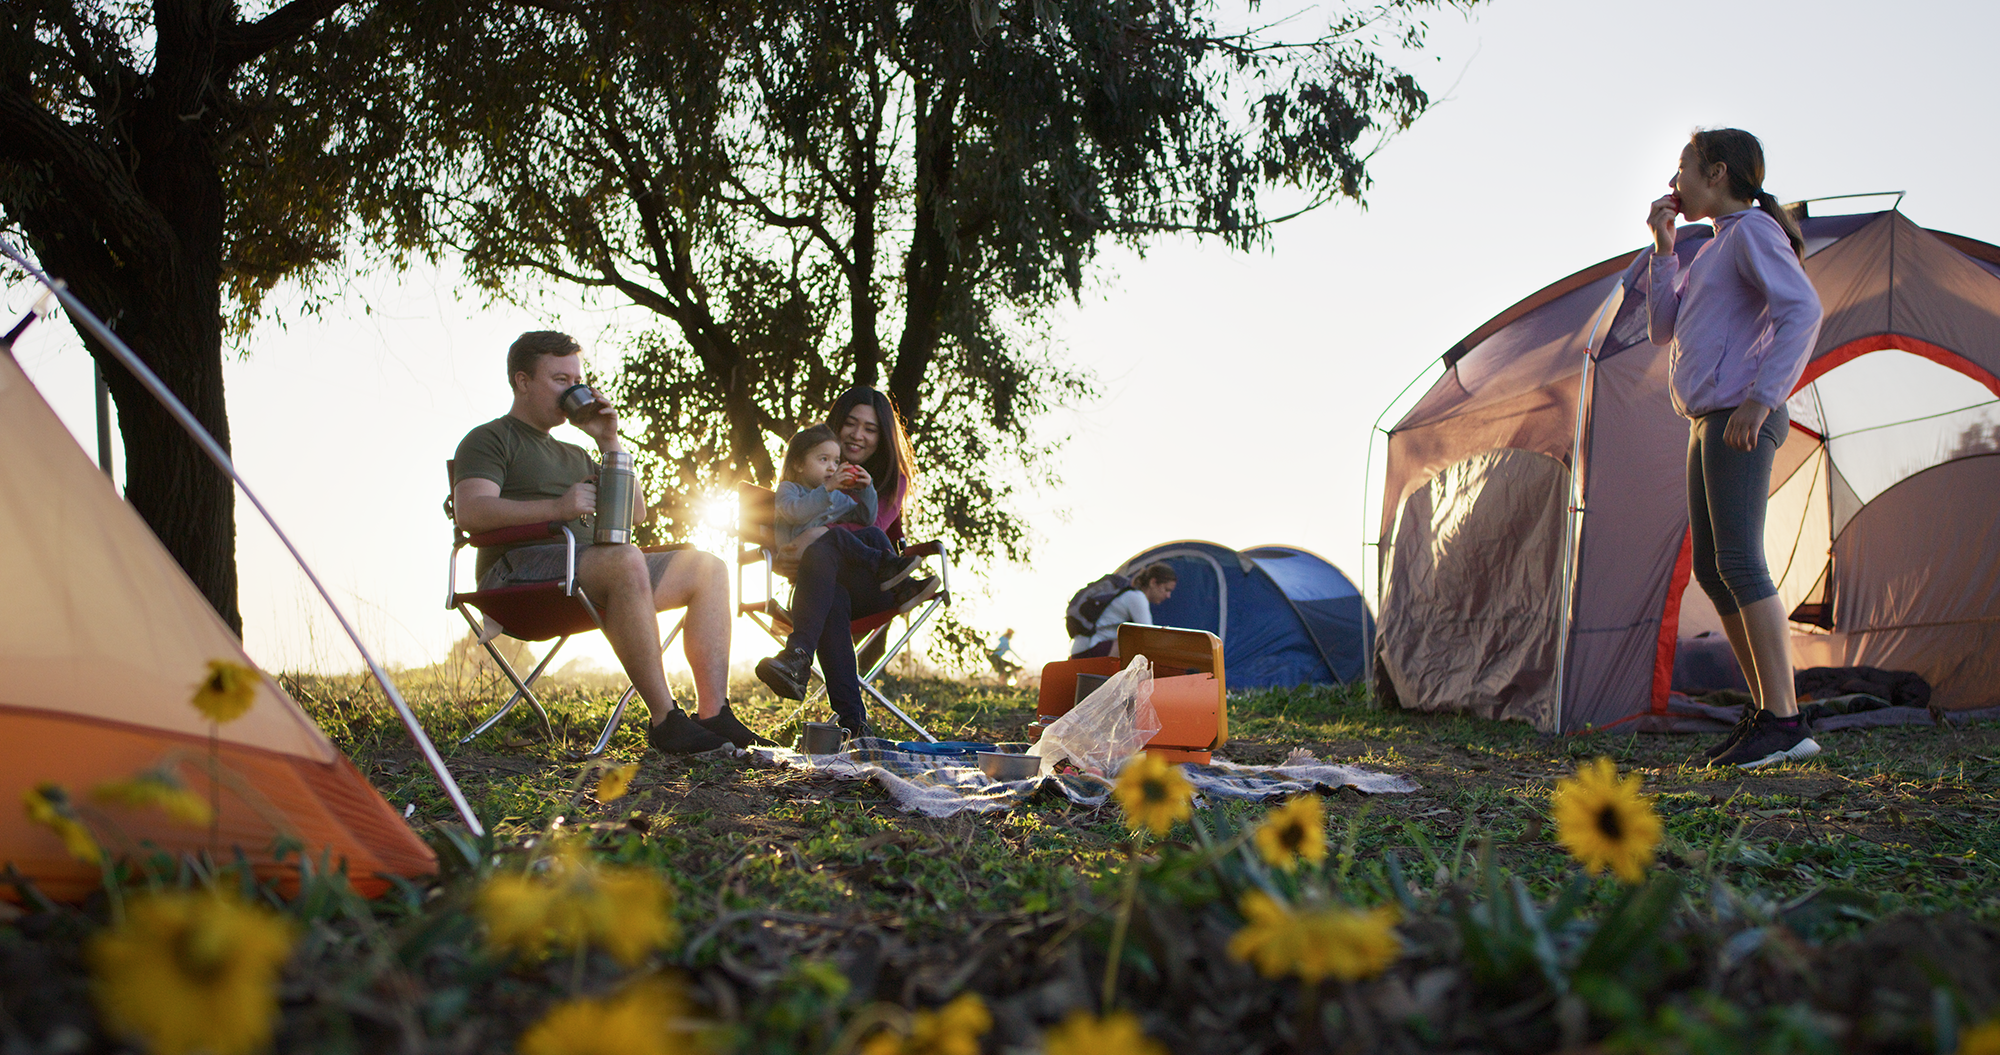 A group of people sitting around a tent with sunflowers in the background.